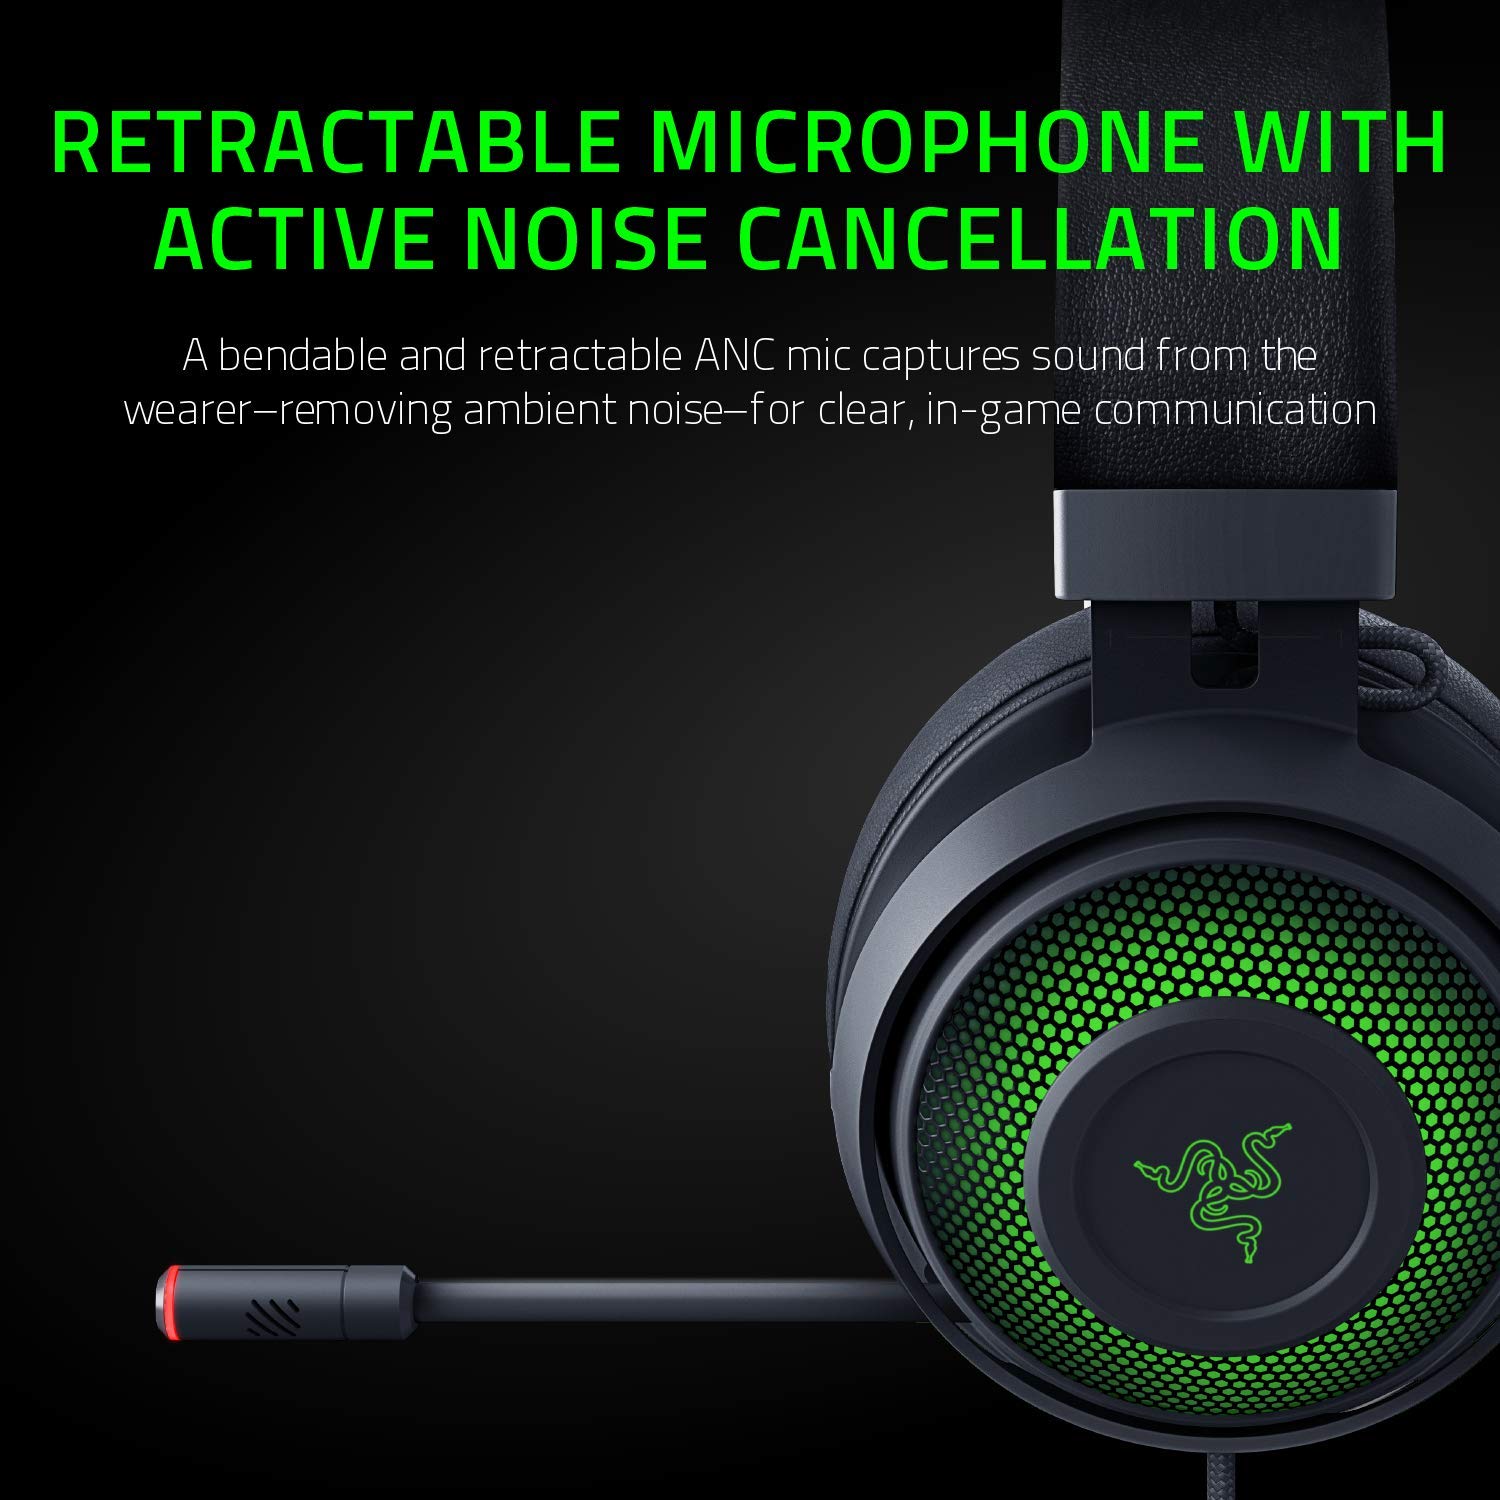 Razer Kraken Ultimate – USB Gaming Headset (Gaming Headphones for PC, PS4 and Switch Dock with Surround Sound, ANC Microphone and RGB Chroma)